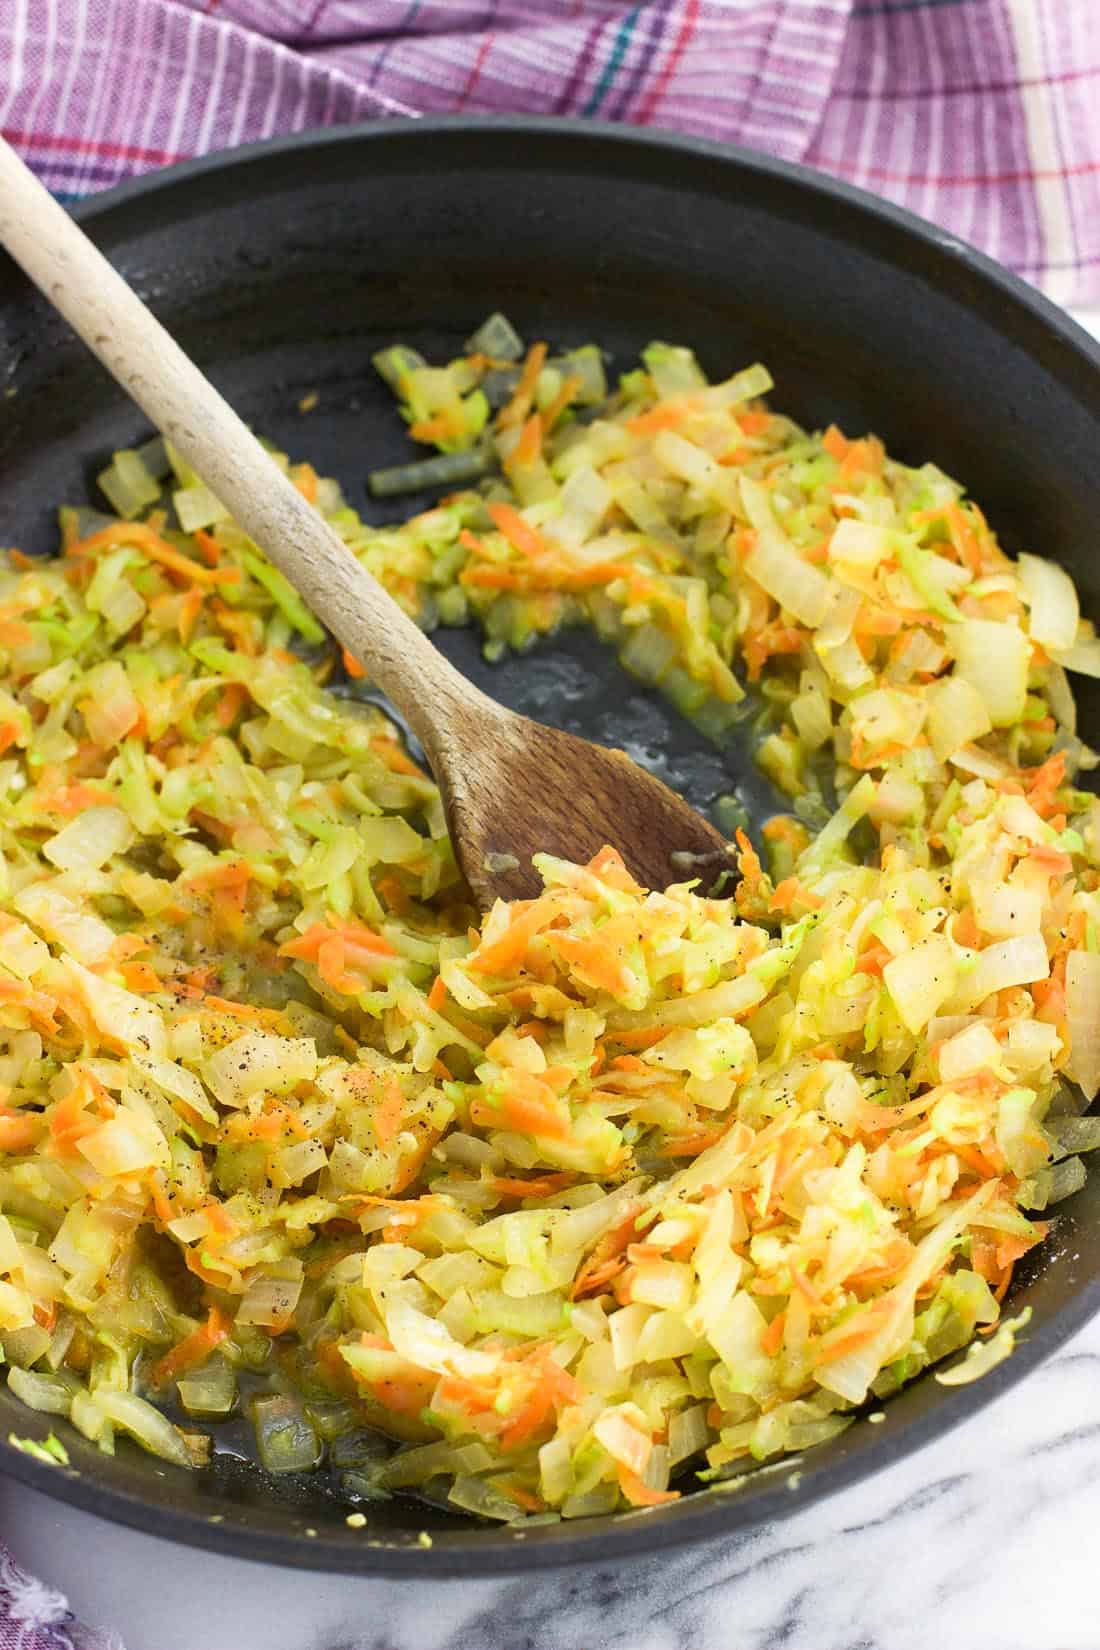 Shredded sauteed vegetables in a pan with a wooden spoon.